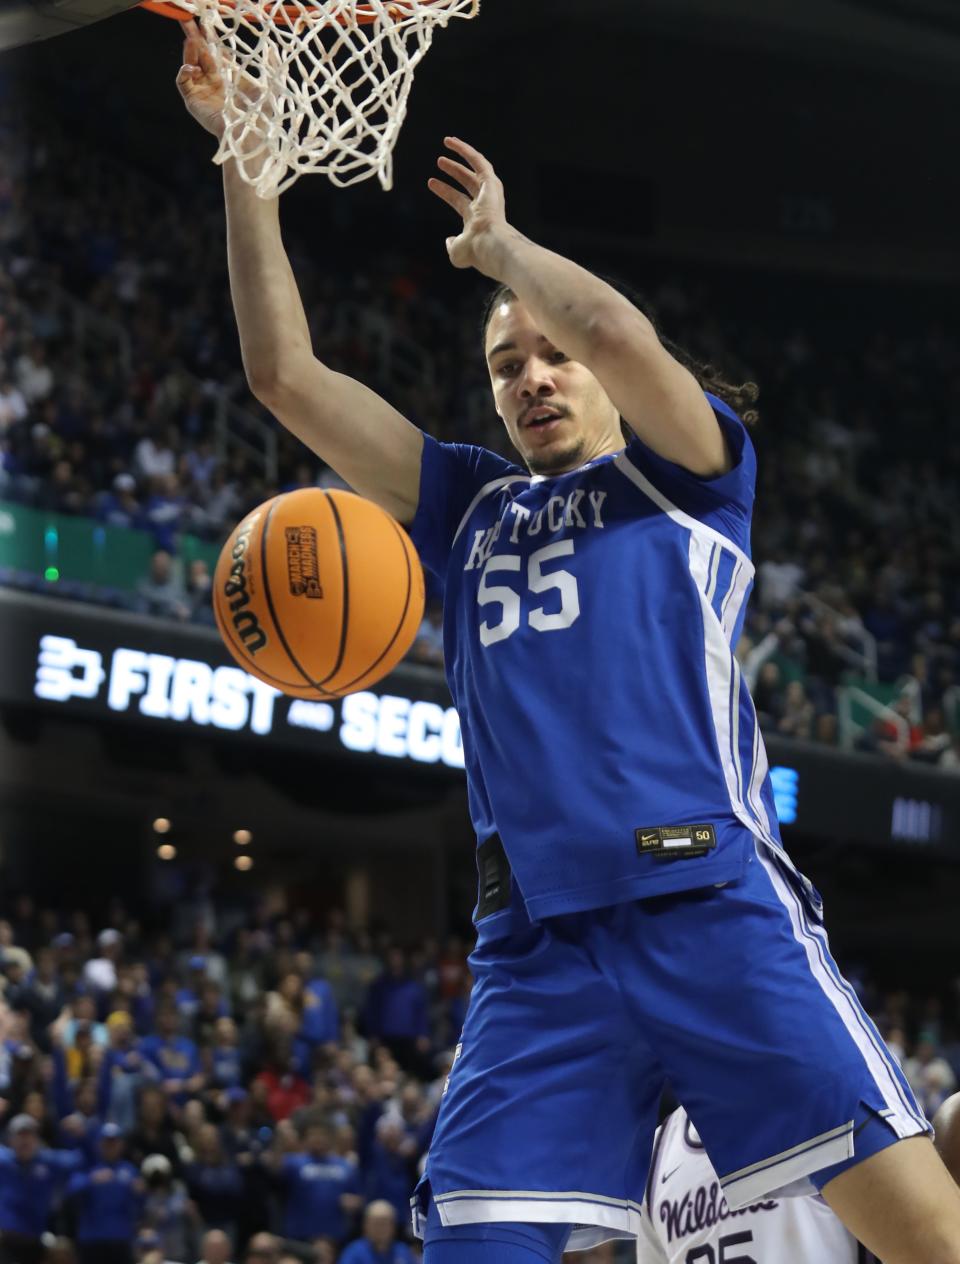 UK's Lance Ware throws down a dunk against Kansas State in March 2023. Ware will play this season at Villanova.